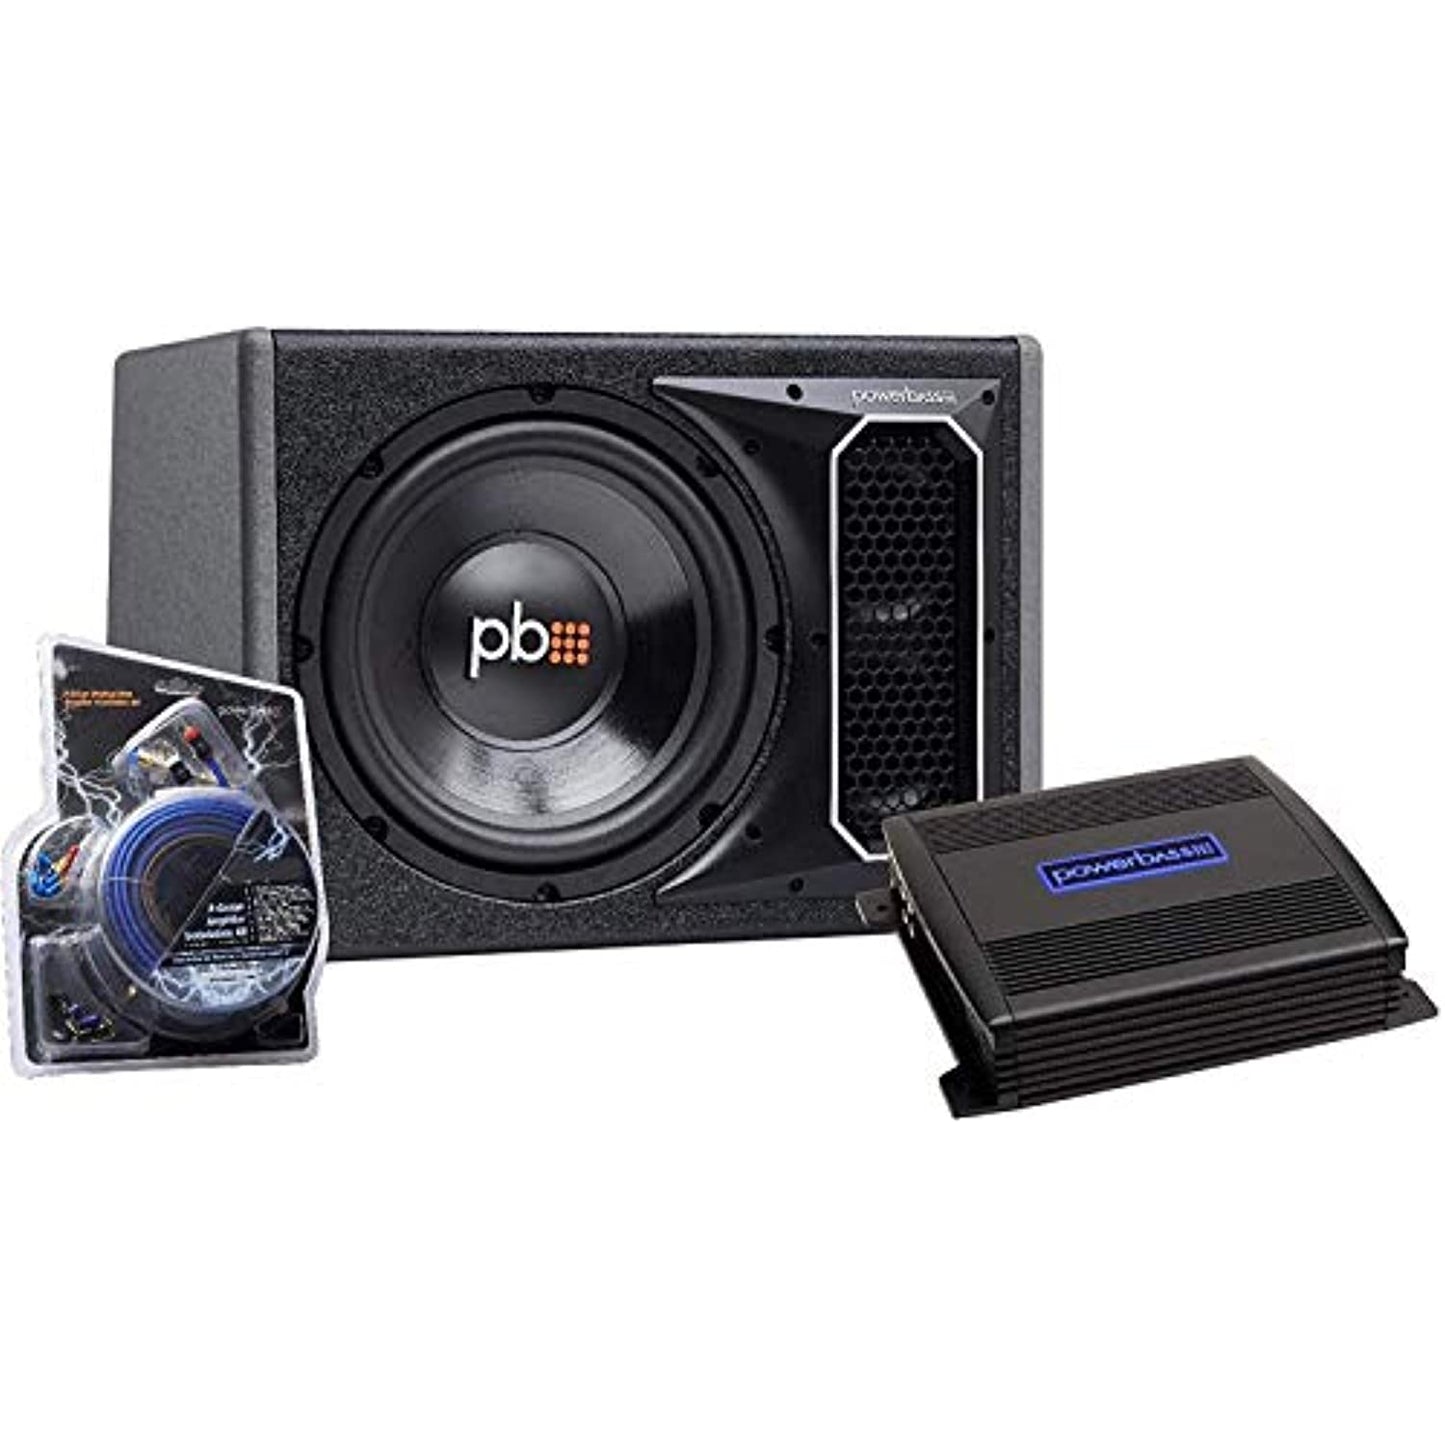 PowerBass Party Pack - Single 10" Subwoofer in Vented Enclosure with ASA3-300.2 Amplifier and Wiring Kit